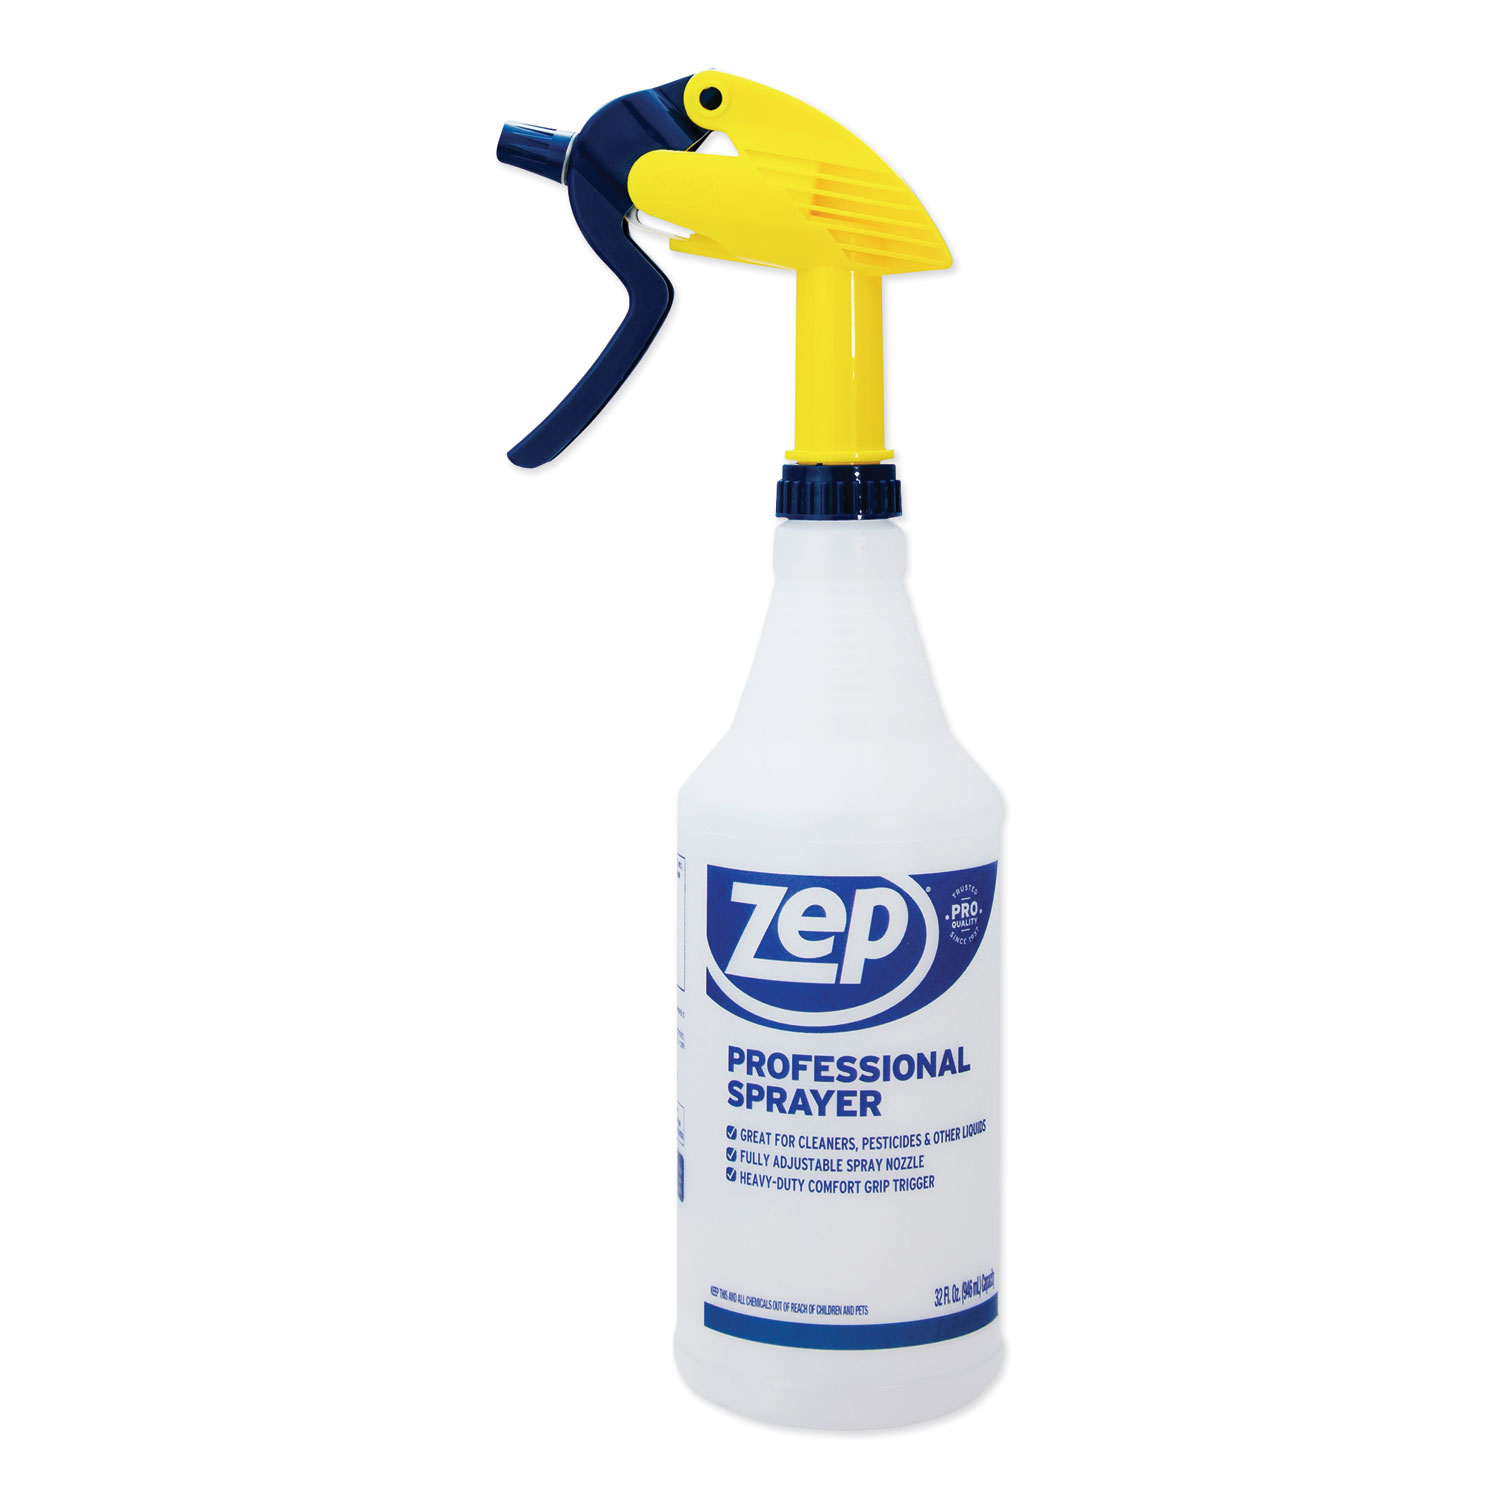  Zep Commercial HDPRO36 Professional Spray Bottle w/Trigger Sprayer, 32 oz, Clear Plastic (ZPEHDPRO36EA) 